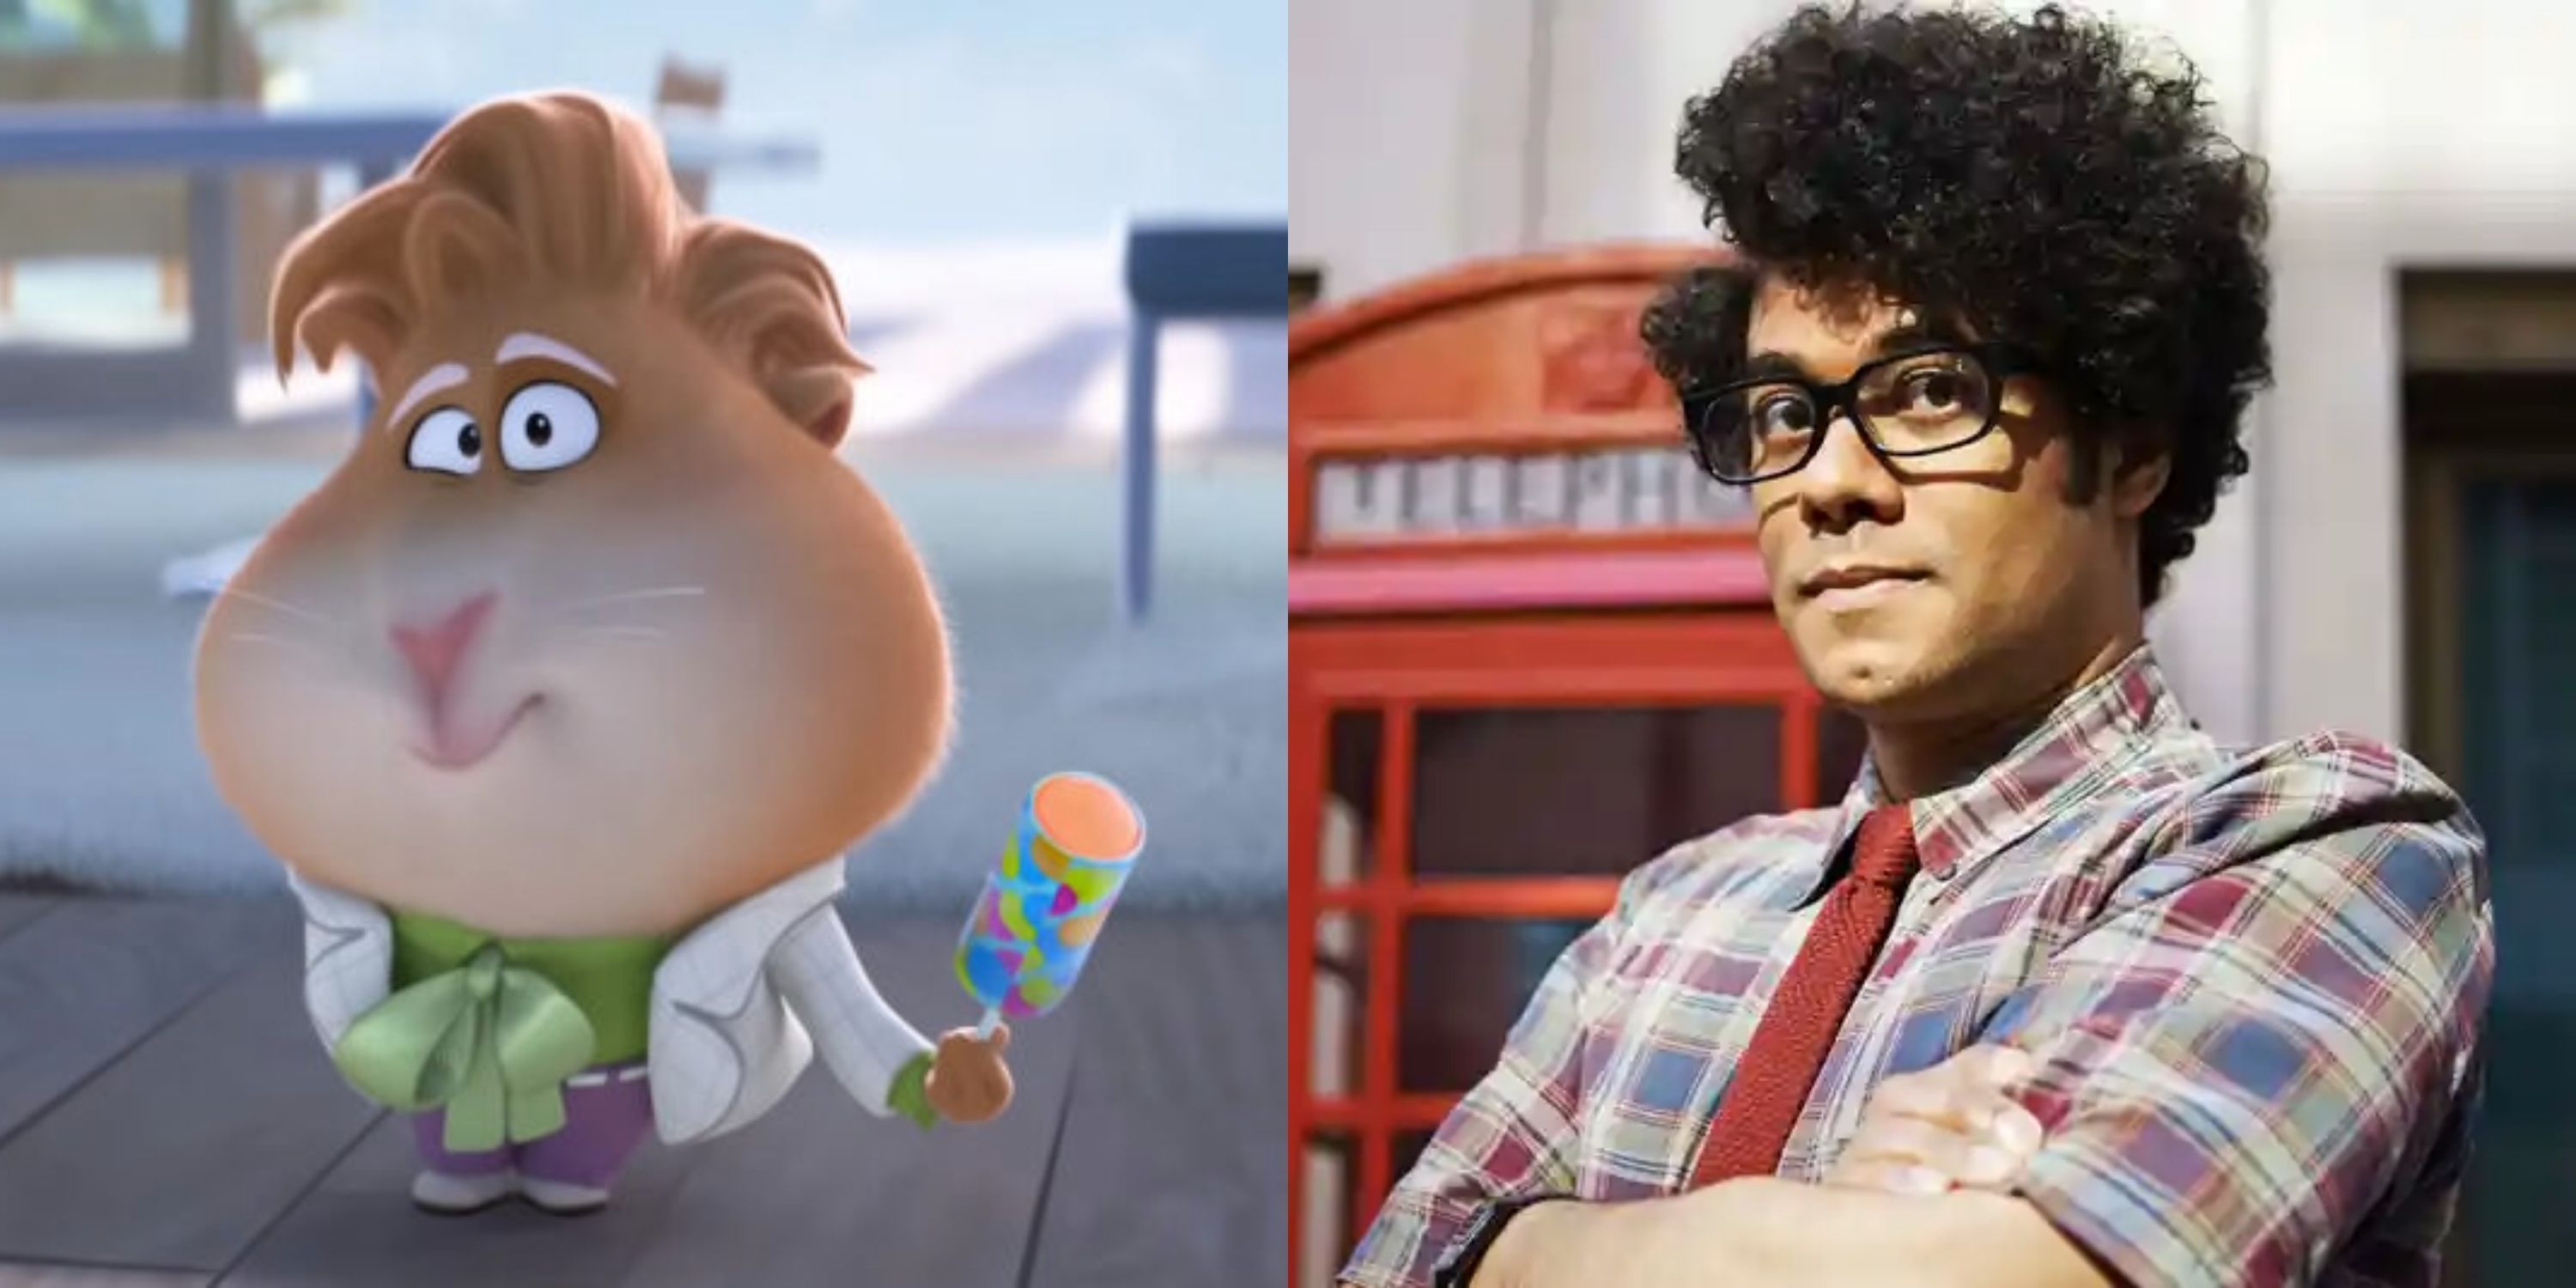 Richard Ayoade as Professor Marmalade in The Bad Guys and The IT Crowd